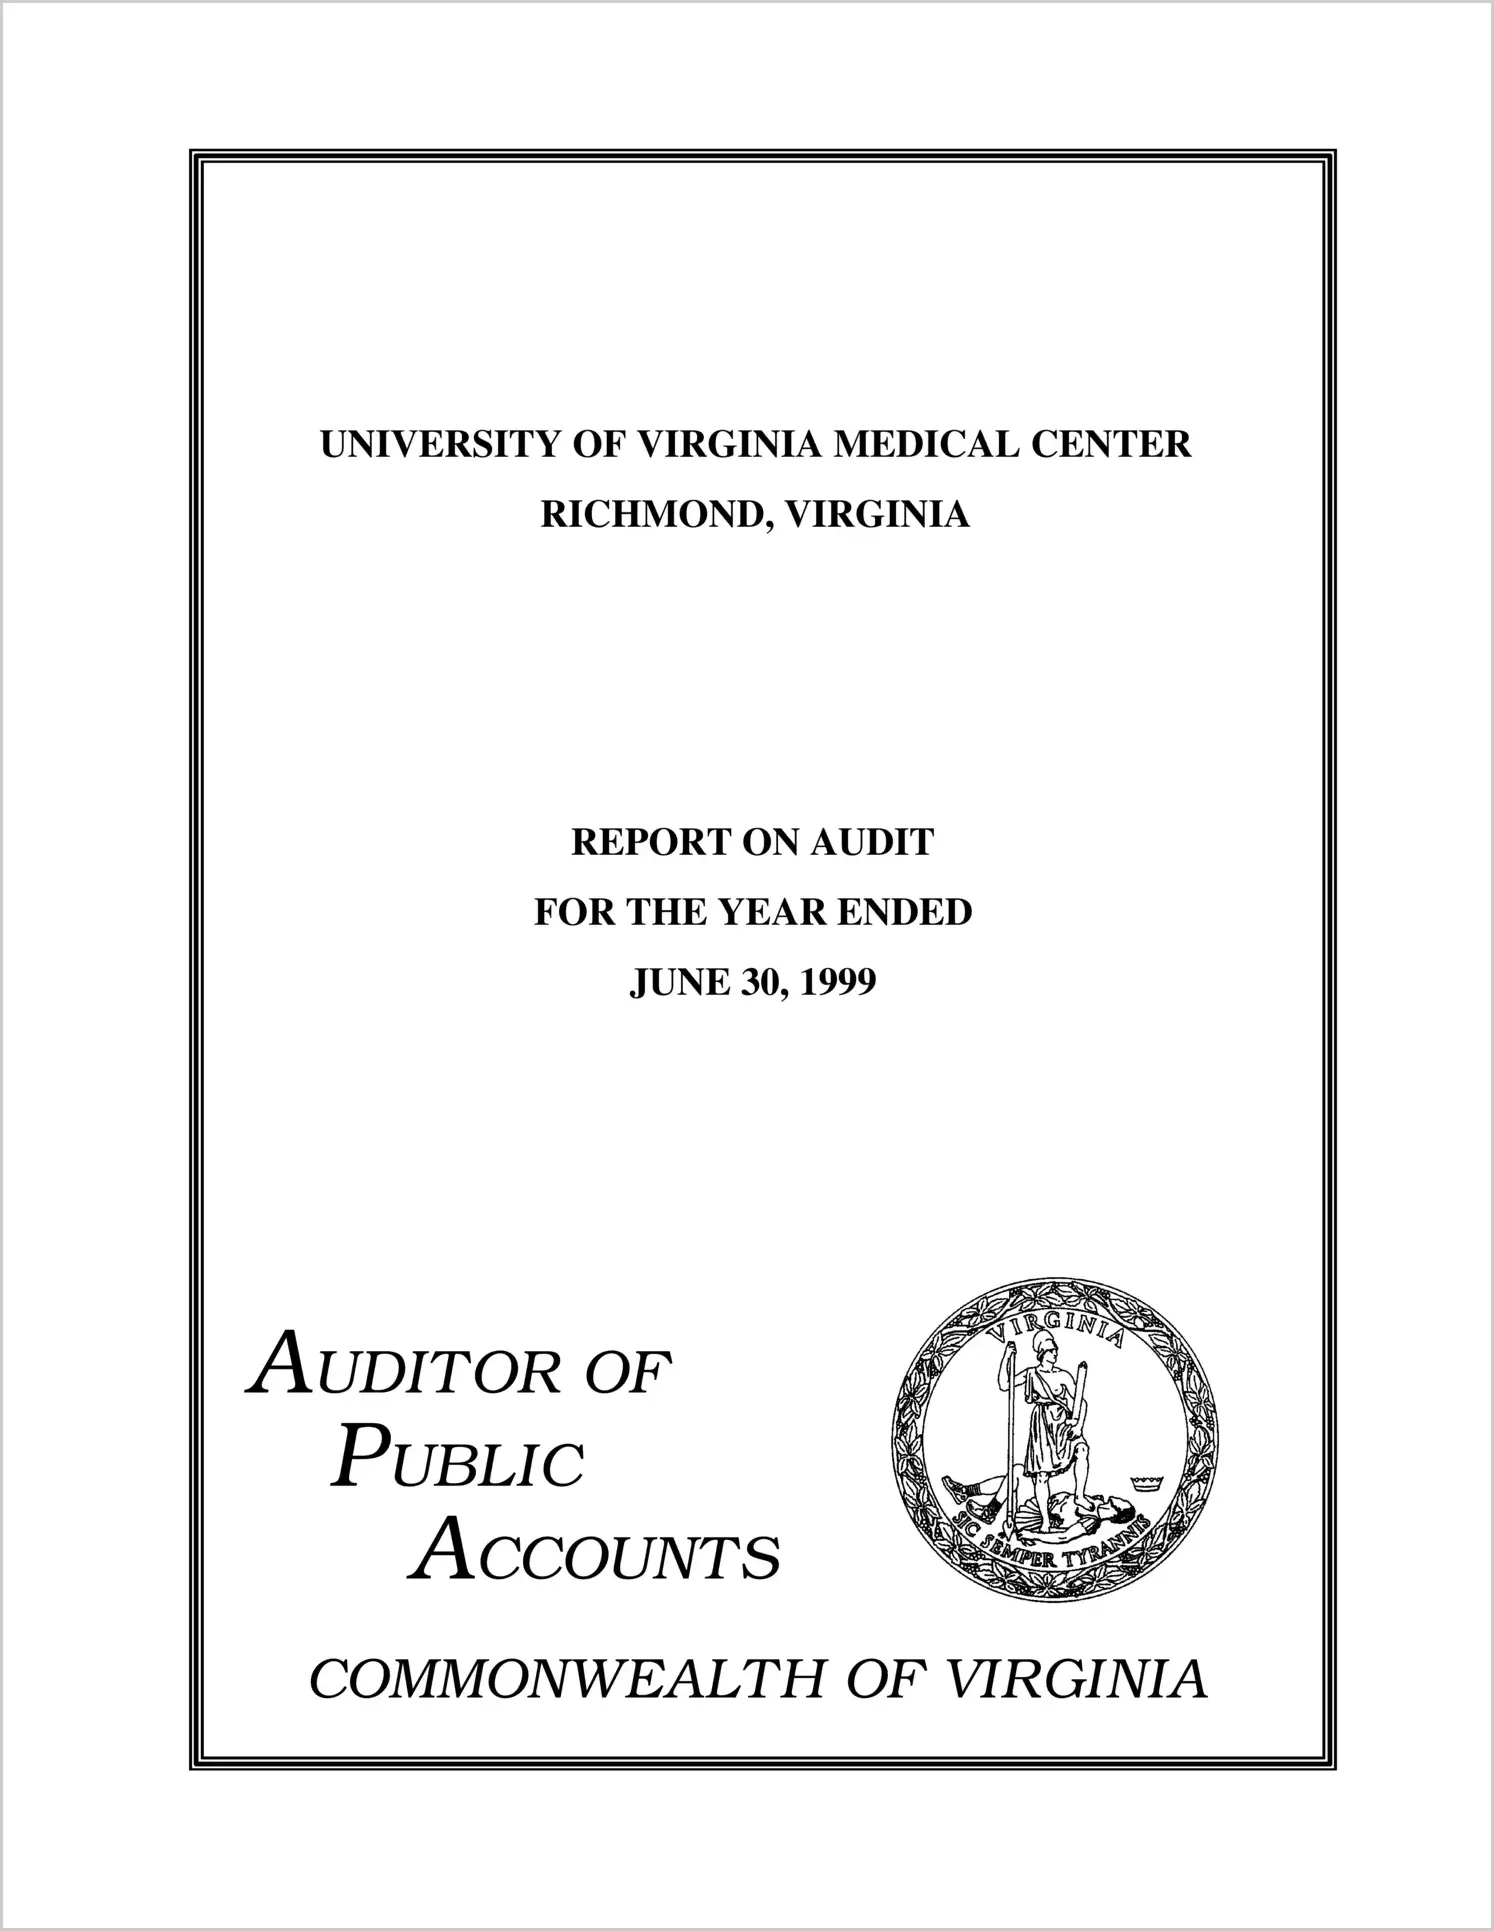 University of Virginia Medical Center for the year ended June 30, 1999